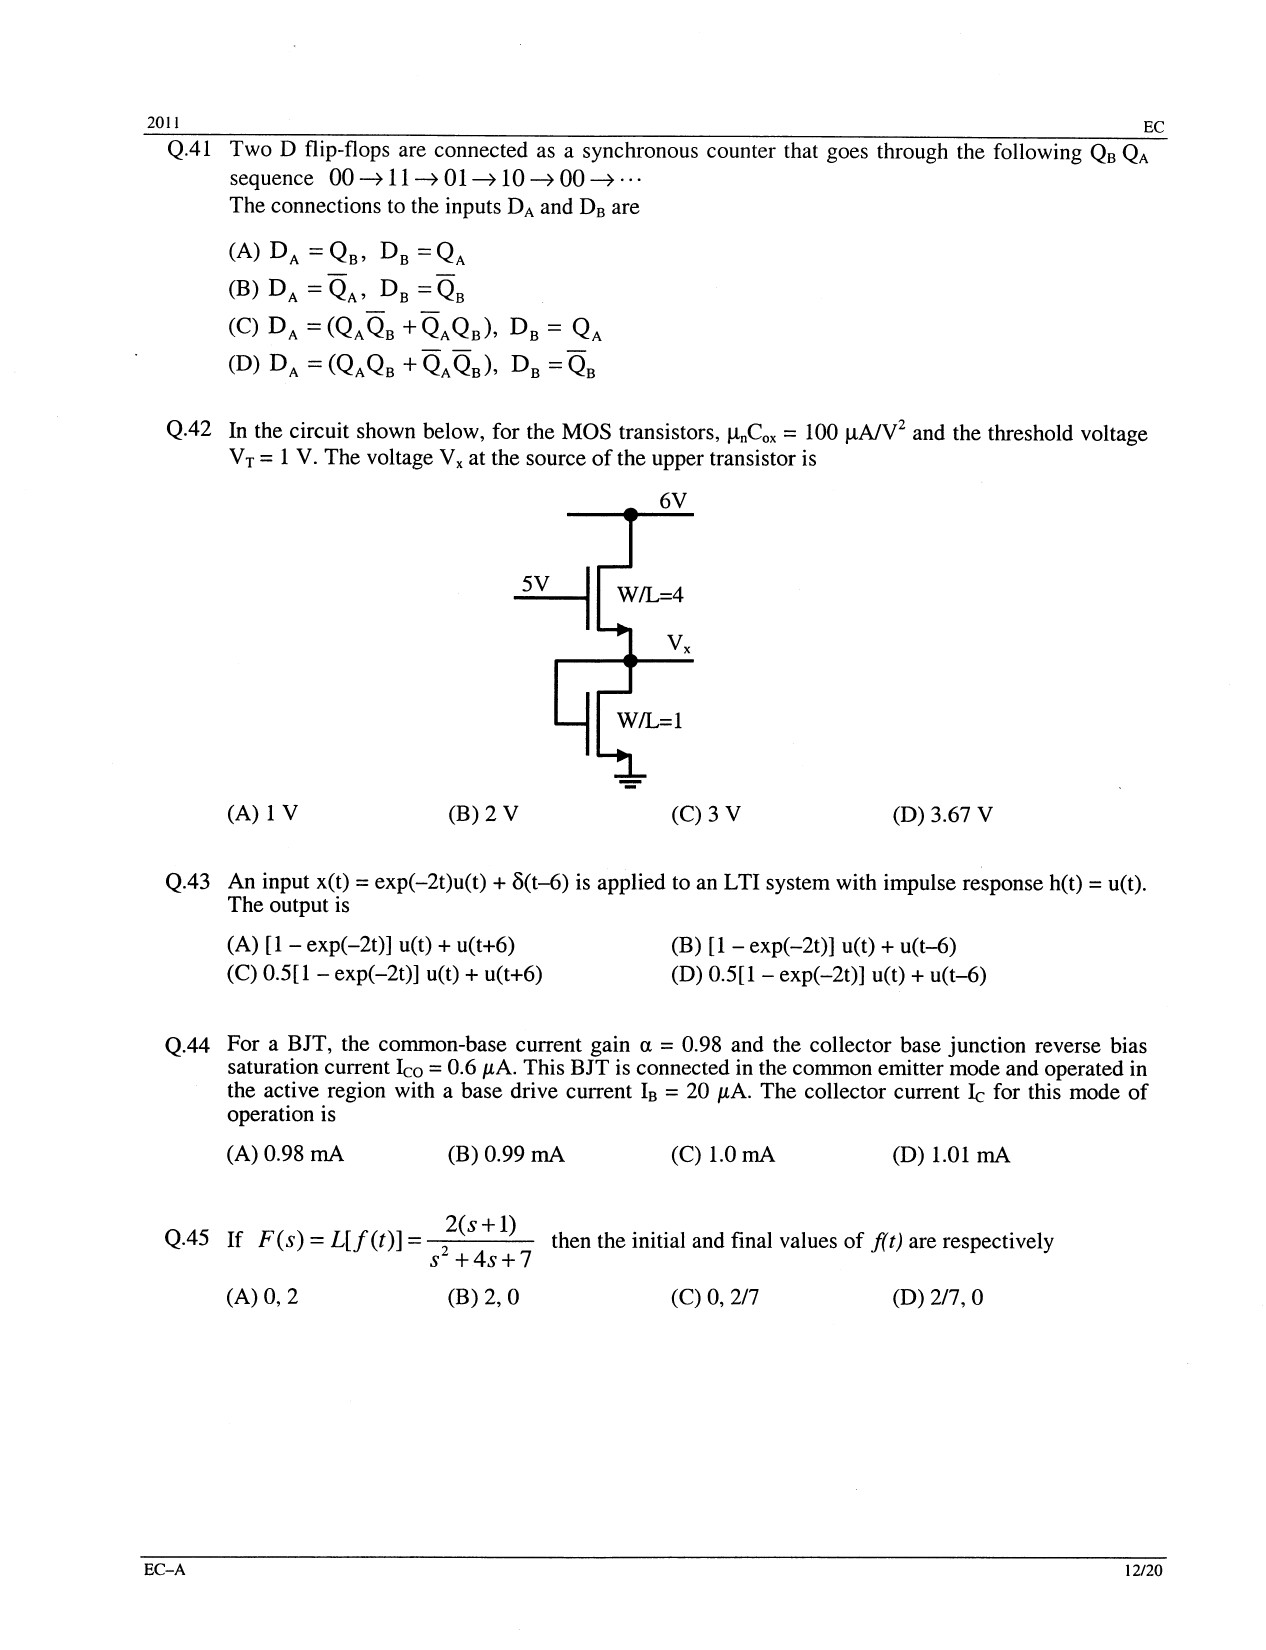 GATE Exam Question Paper 2011 Electronics and Communication Engineering 12